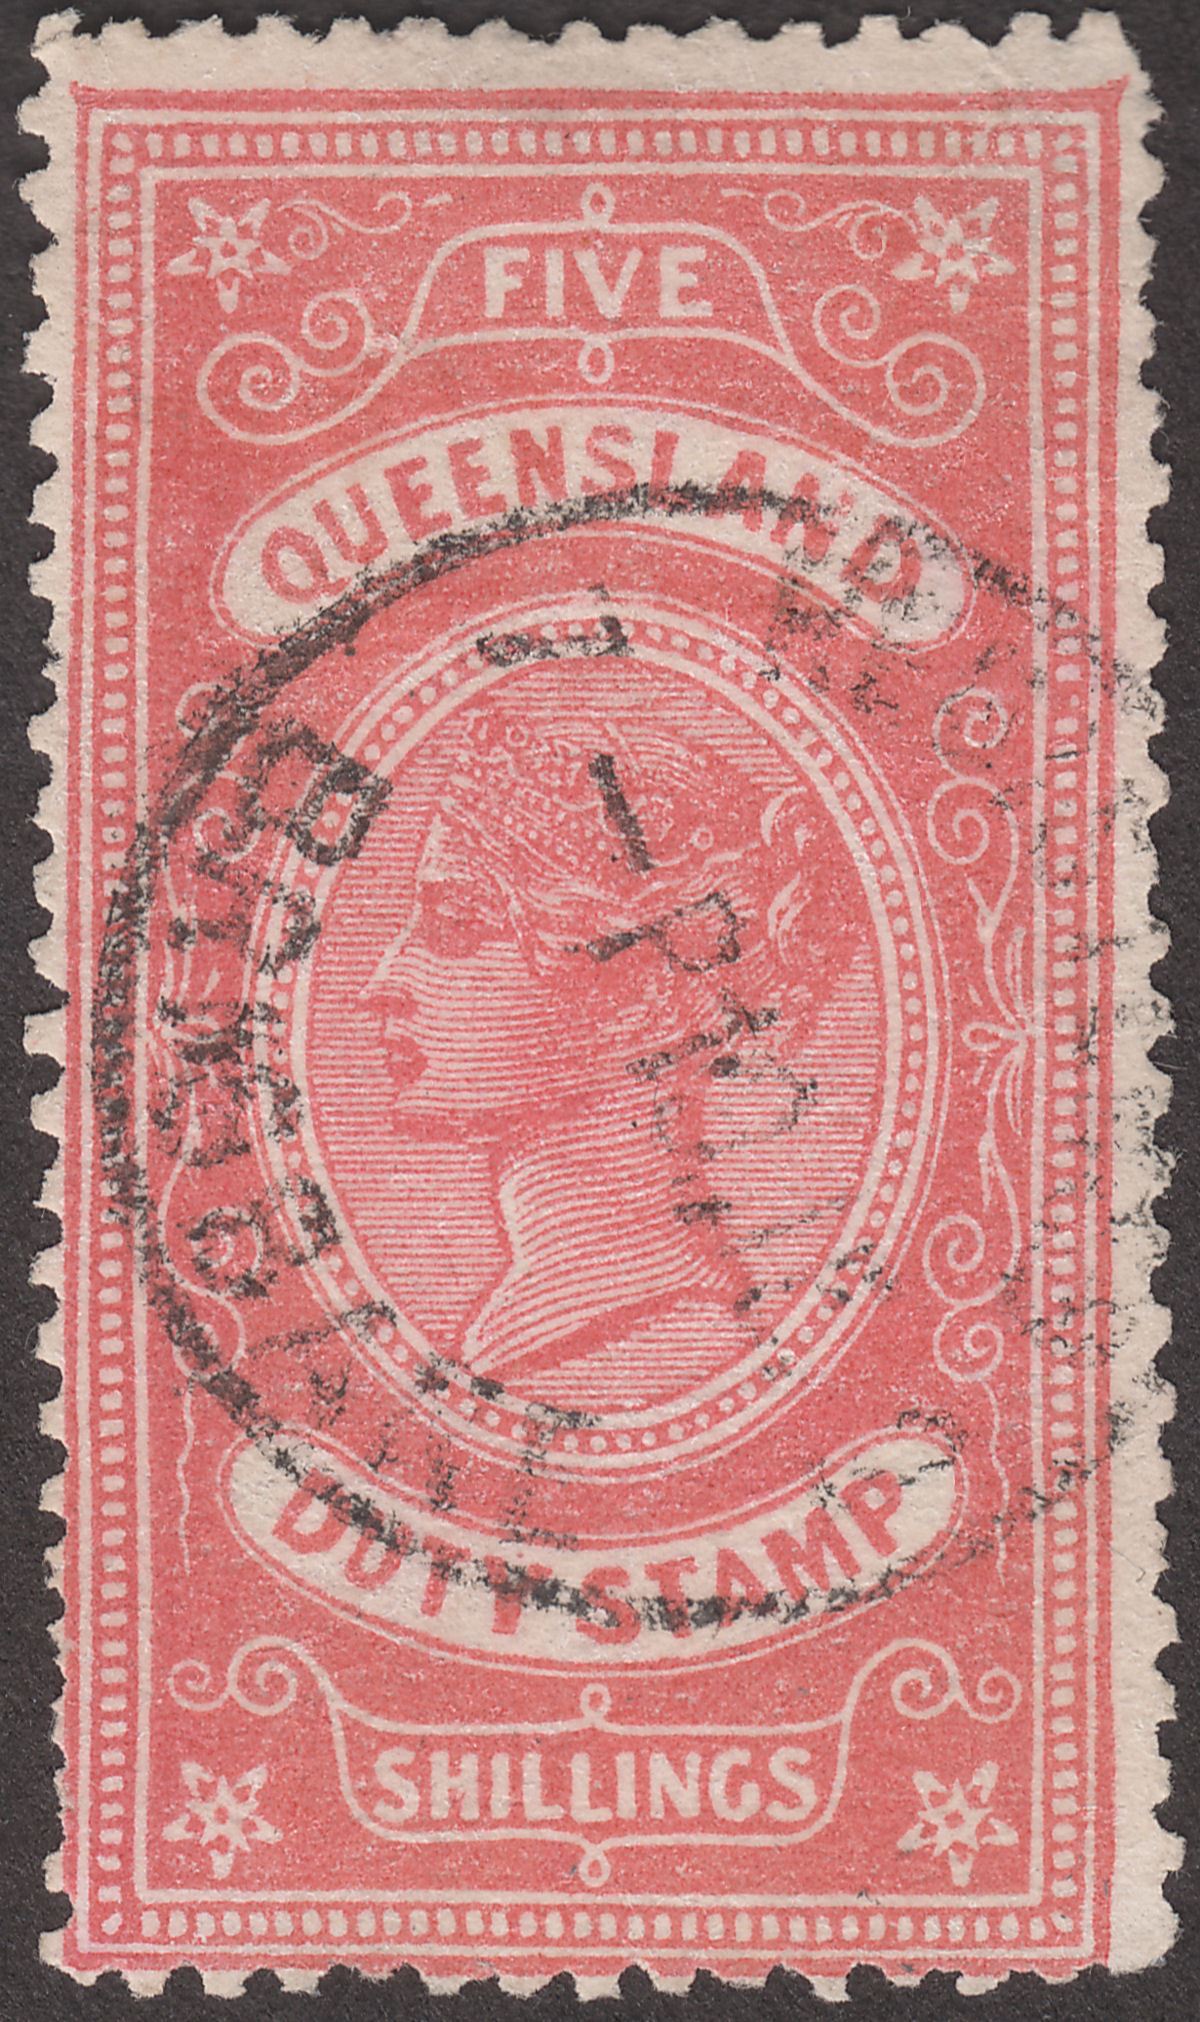 Queensland 1892 QV Duty Stamp Duty 5sh Used* SG Footnote unlikely looking cancel